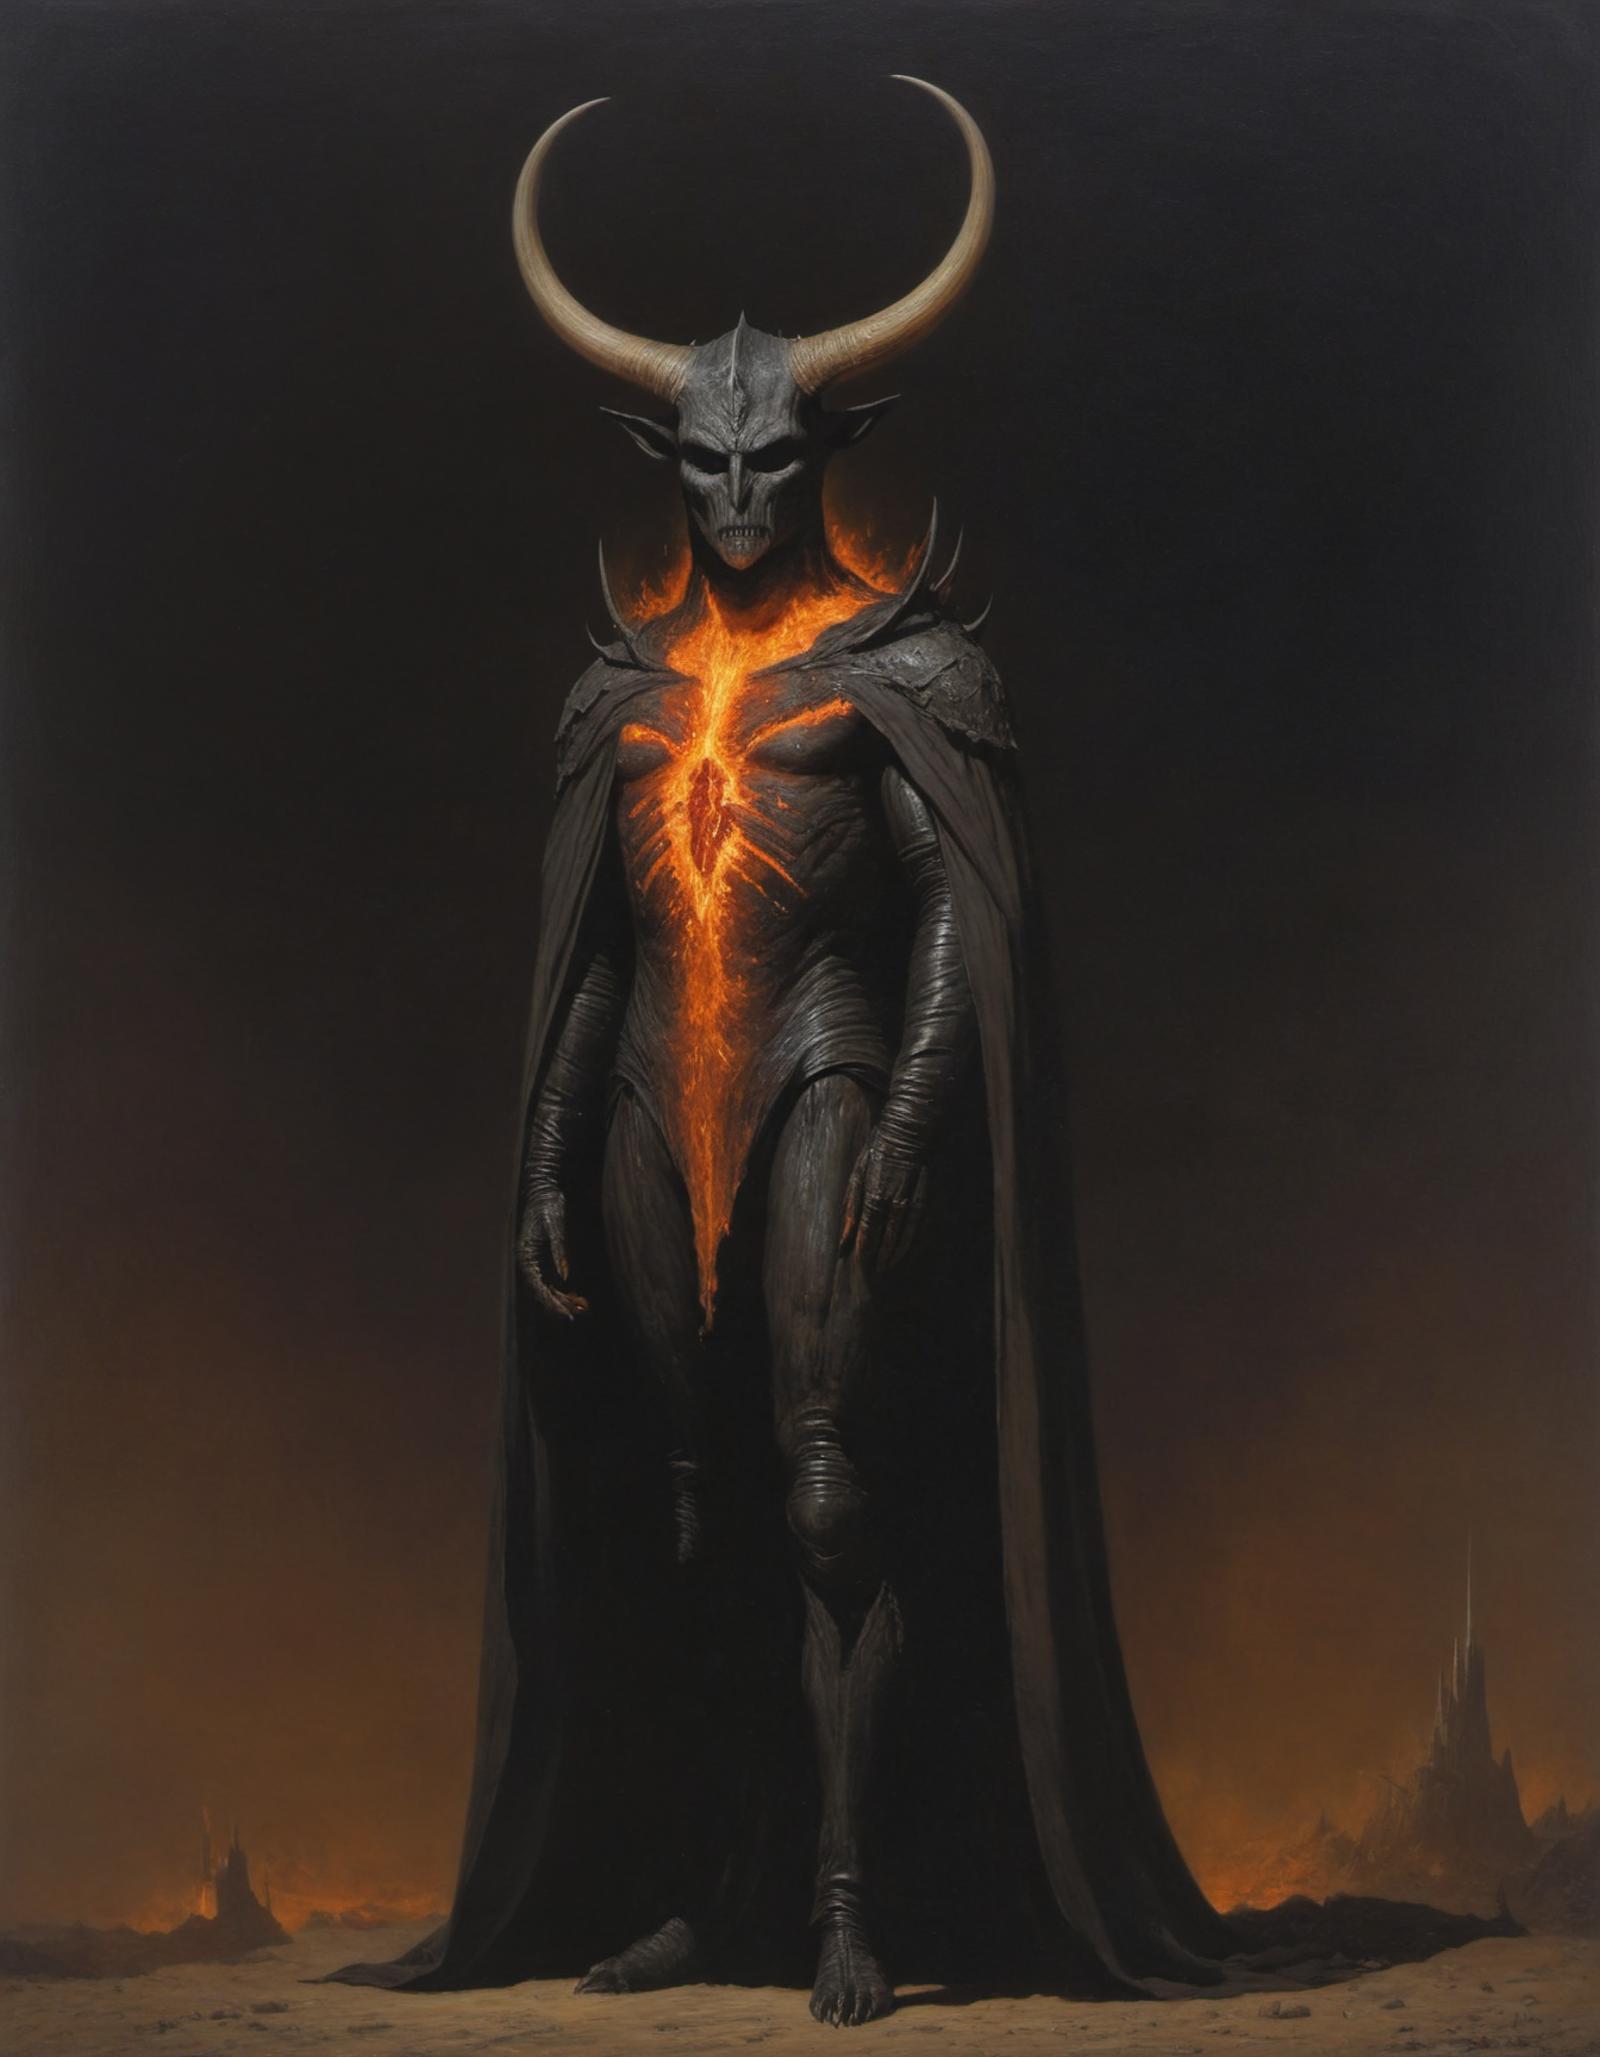 A demonic figure in a black cape and horns with a heart and flames as part of its chest.